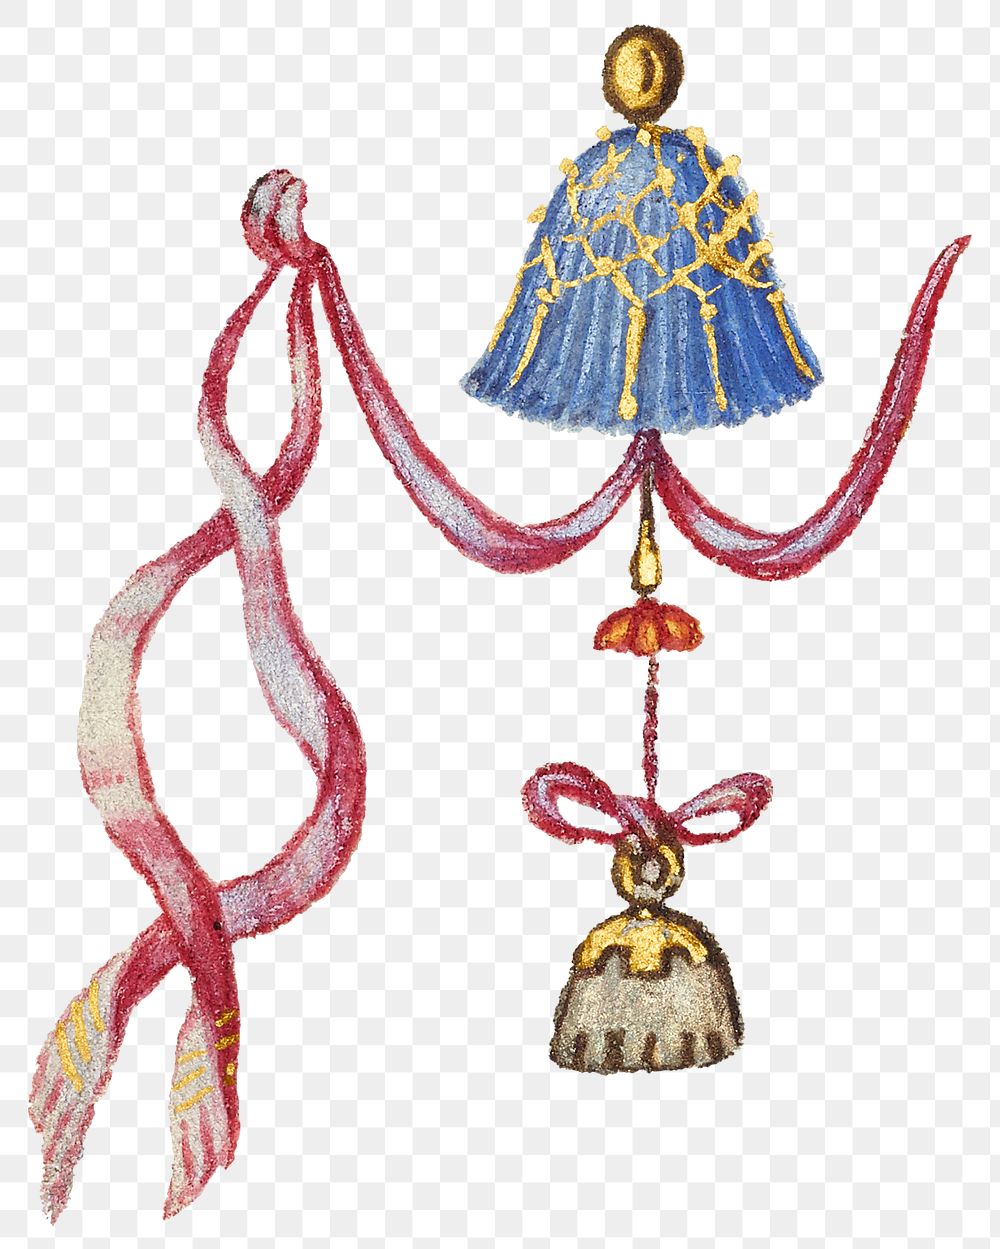 Heraldic tassel and ribbon old medieval ornament png